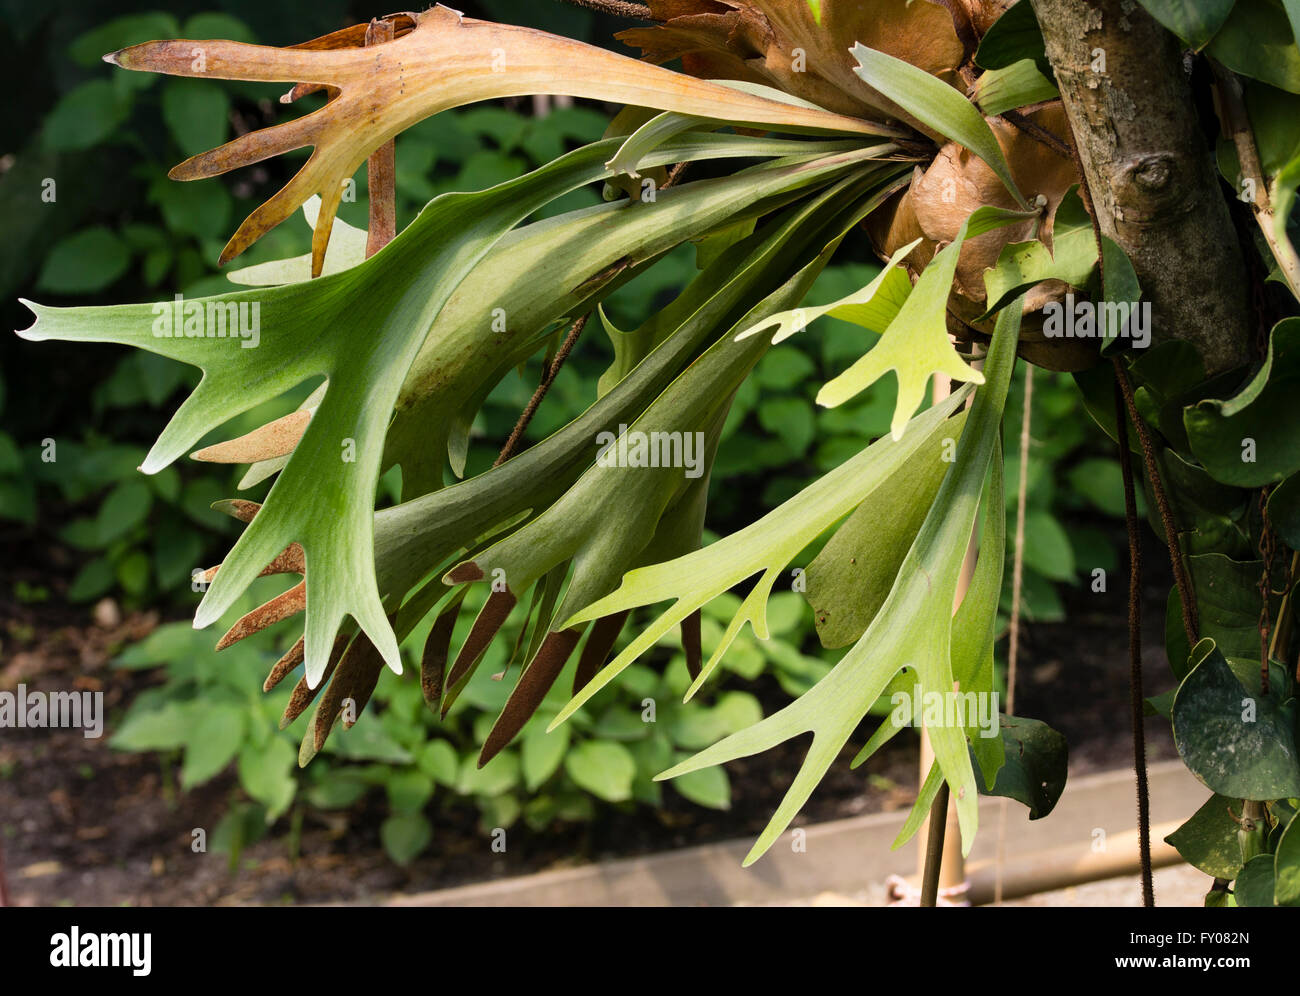 Fertile fronds of the tender staghorn fern, Platycerium bifurcatum, grow from sterile basal fronds that attach to tree trunks Stock Photo